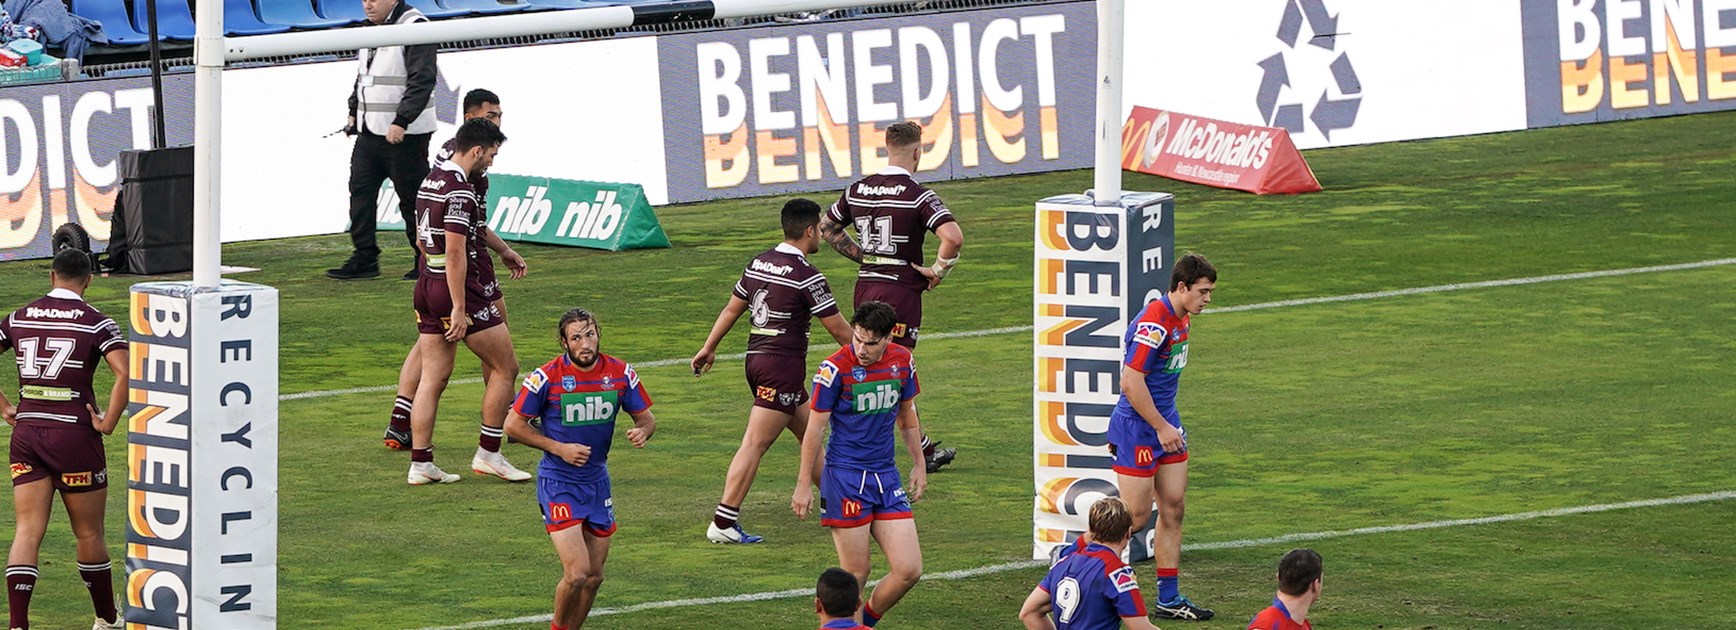 Knights 20s dominate on home turf to thrash Manly